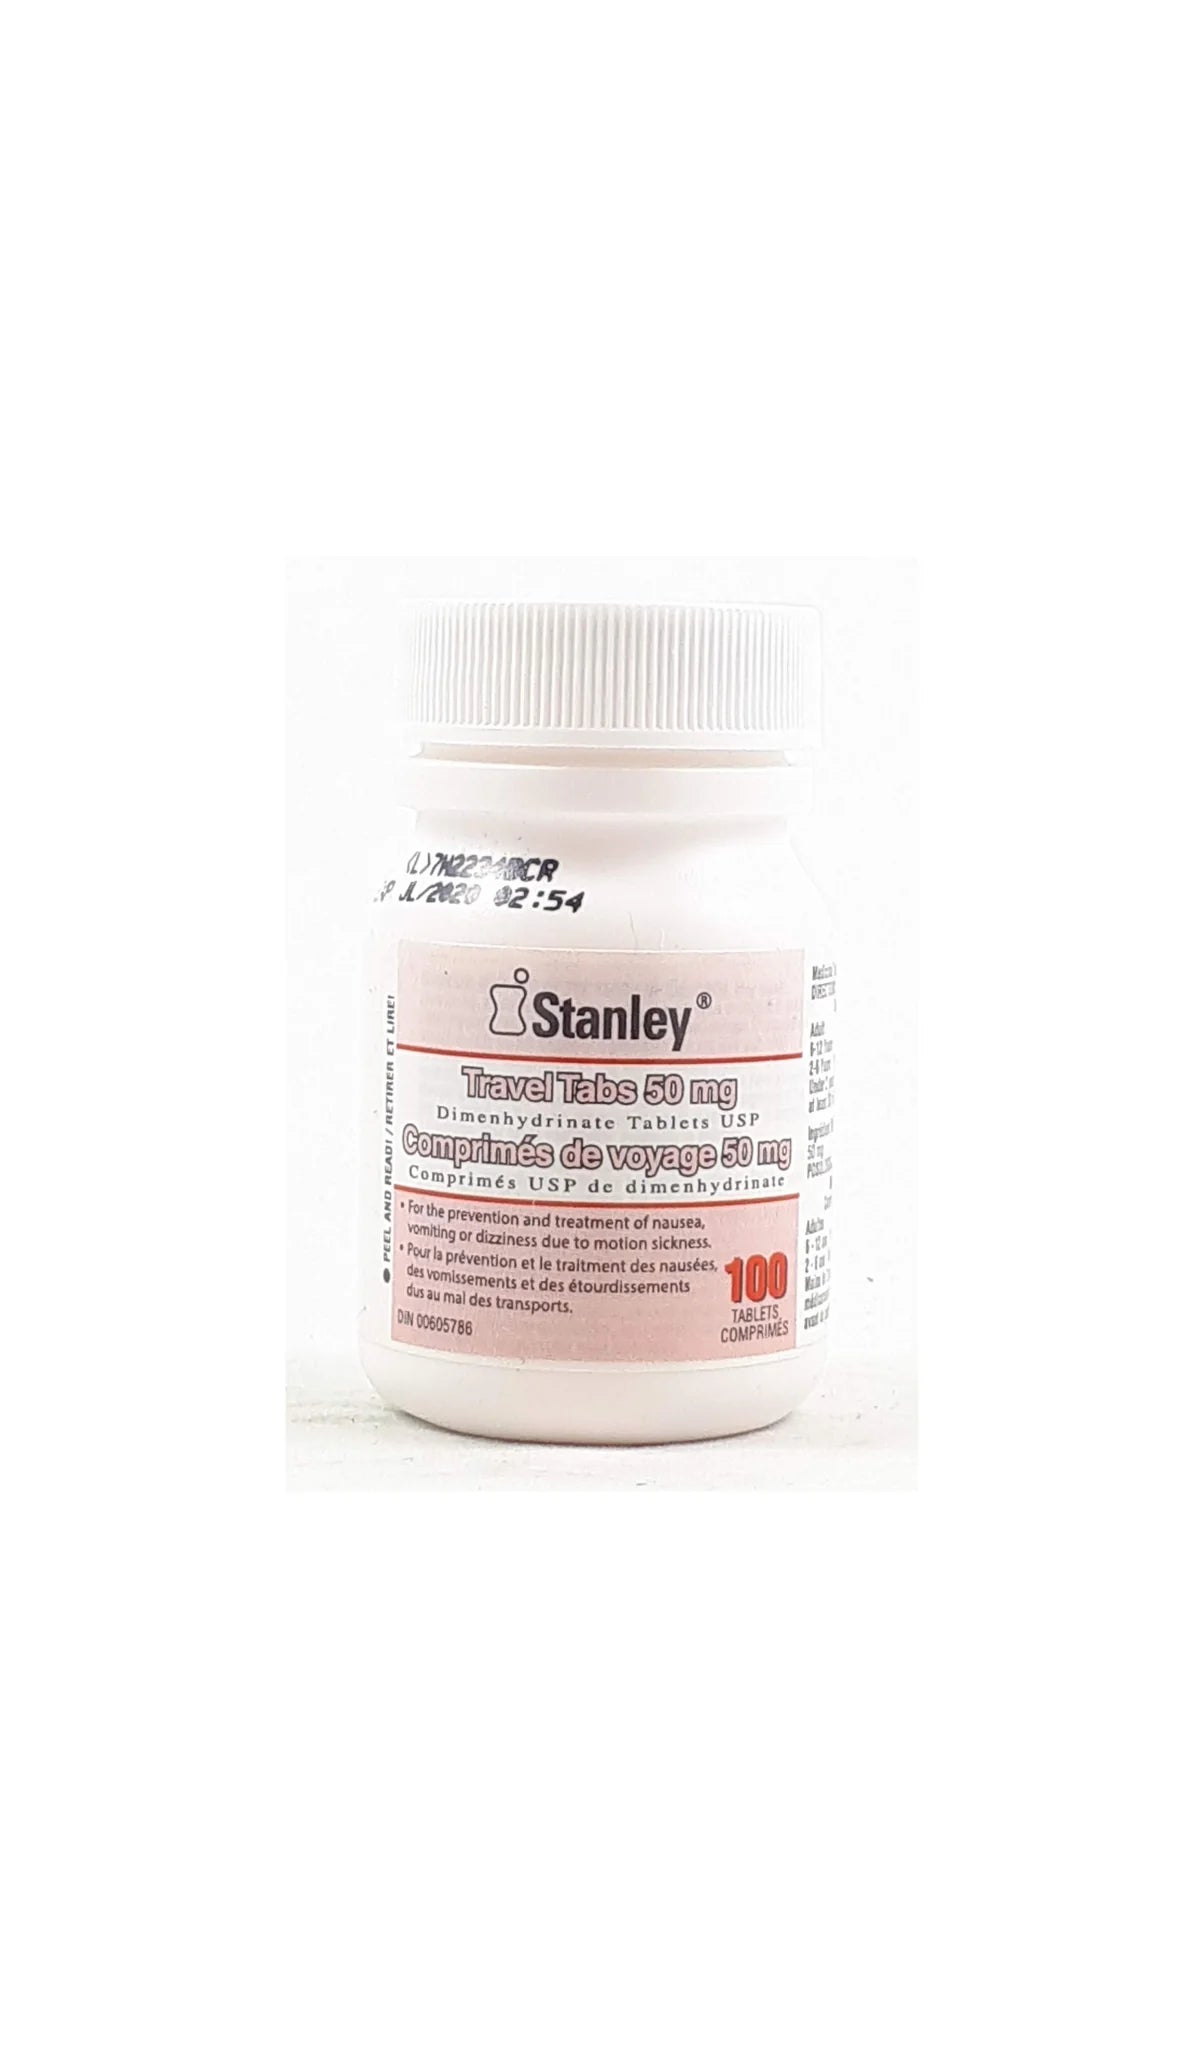 STANLEY 50 mg TRAVEL TABS, 100 TABLETS